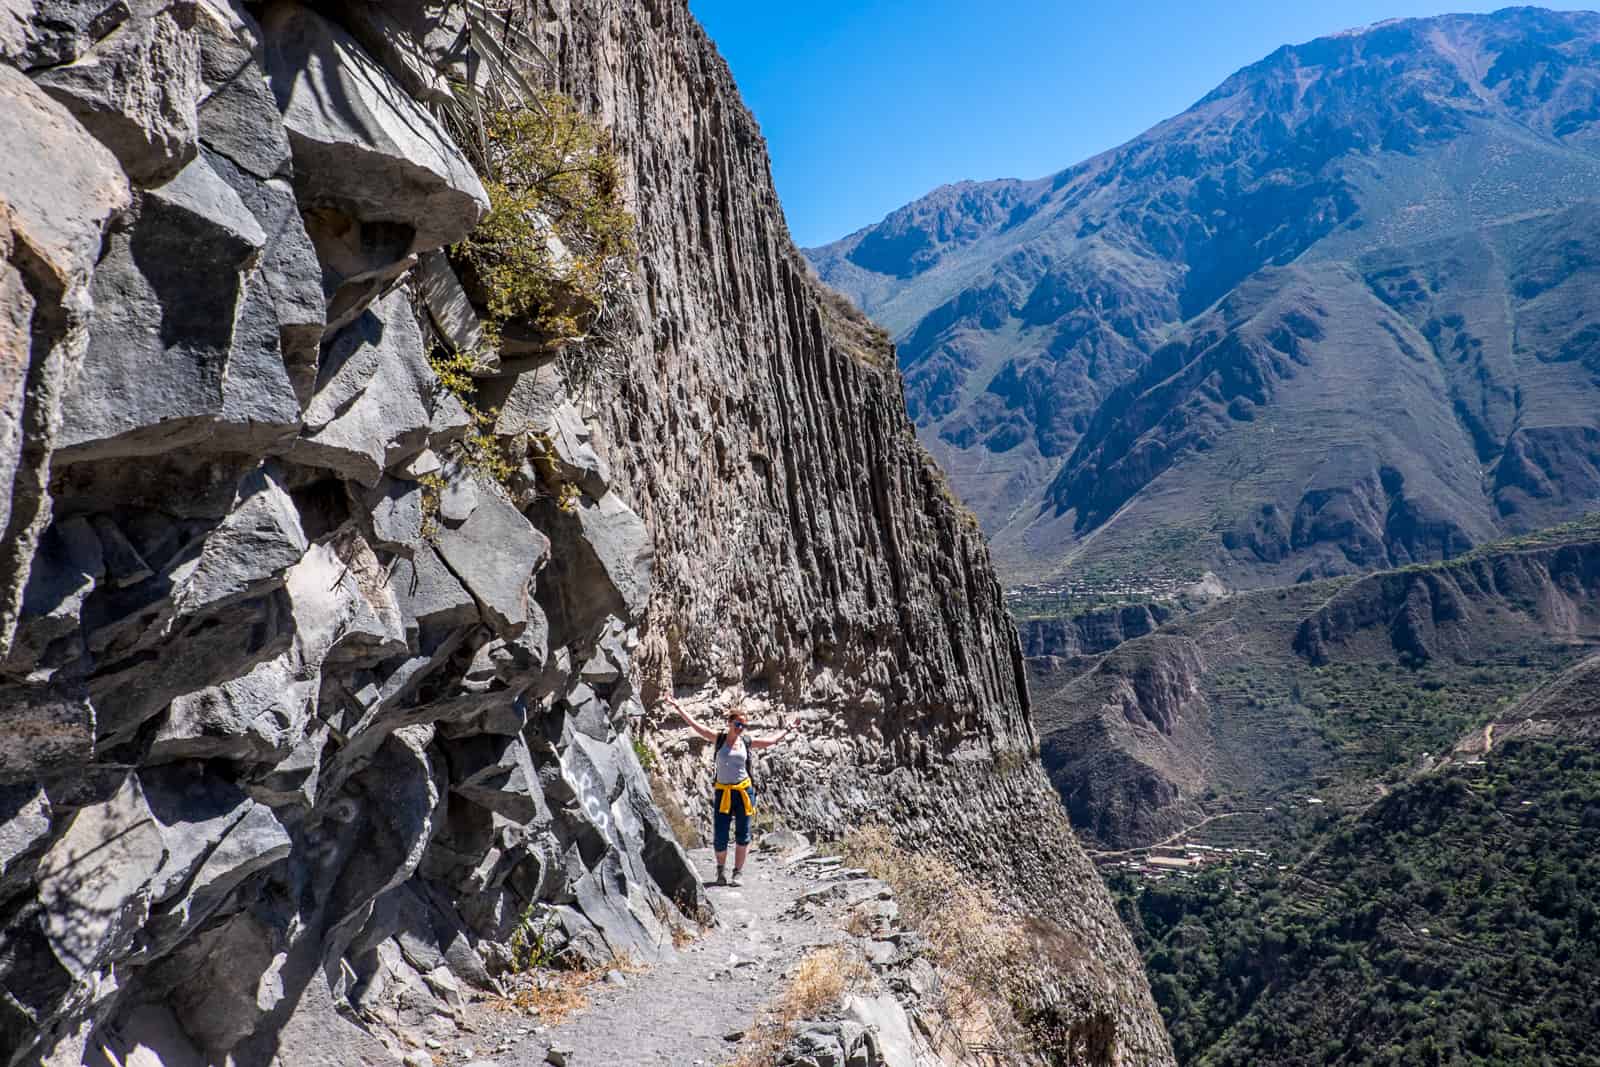 A tourist on a rock ledge path trekking in Colca Canyon in Peru.